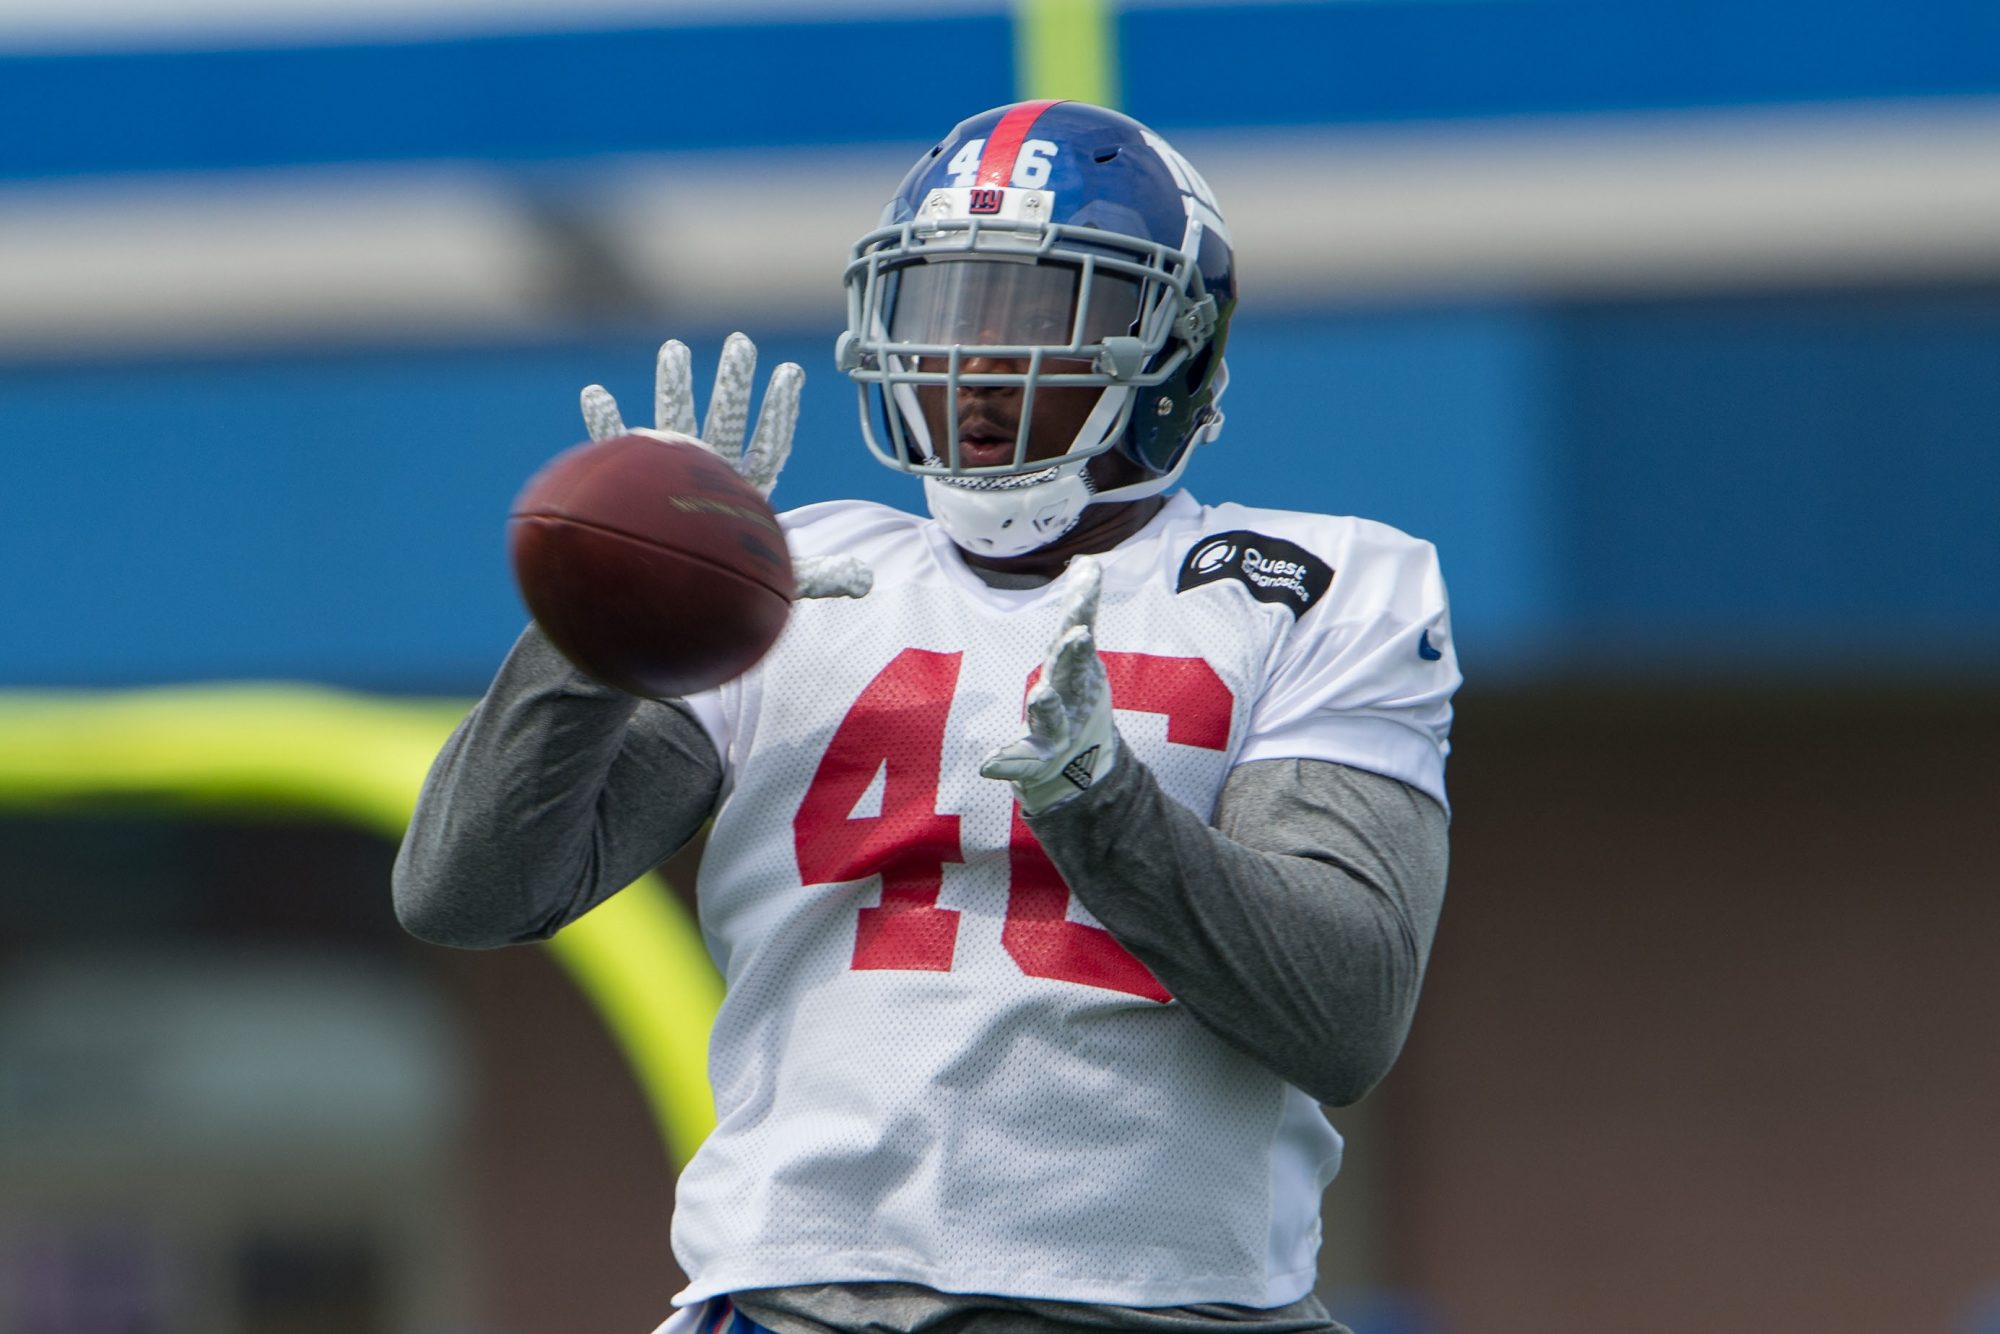 Will Johnson Could Make A Return To The New York Giants (Report) 